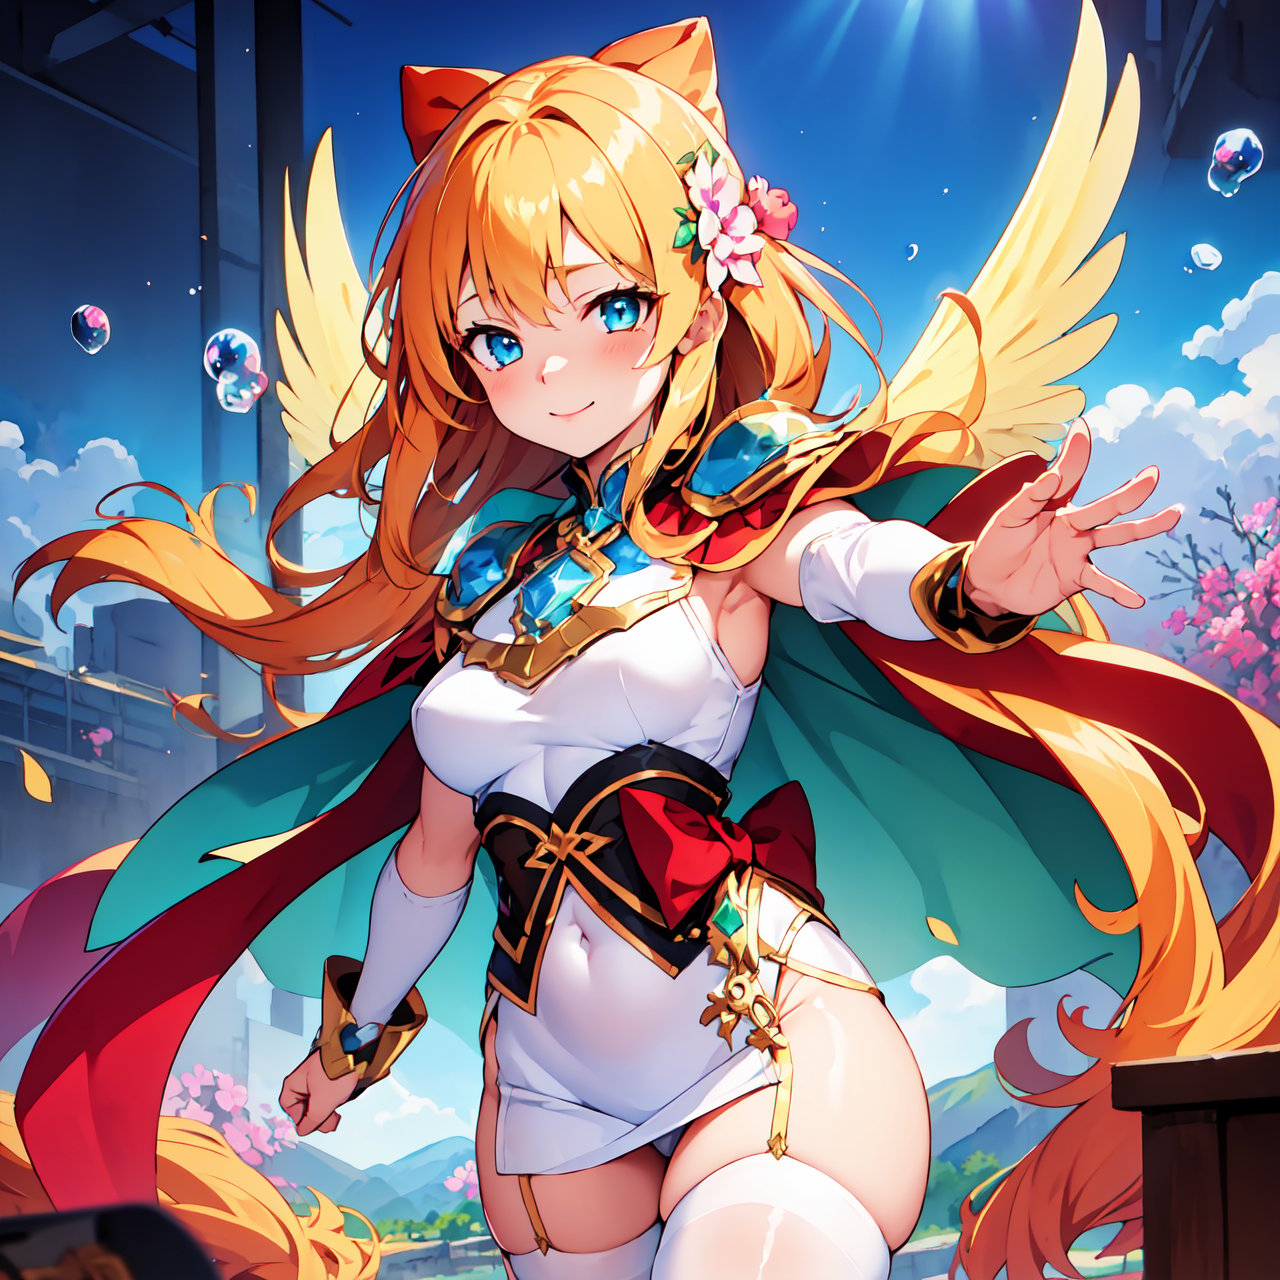 masterpiece, {{{best quality}}}, (illustration)), {{{extremely detailed CG unity 8k wallpaper}}}, game_cg, (({{1girl}})), {solo}, (beautiful detailed eyes), ((shine eyes)), goddess, fluffy hair, messy_hair, ribbons, hair_bow, {flowing hair}, (glossy hair), (Silky hair), ((white stockings)), (((gorgeous crystal armor))), cold smile, stare, cape, (((crystal wings))), ((grand feathers)), ((altocumulus)), (clear_sky), (snow mountain), ((flowery flowers)), {(flowery bubbles)}, {{cloud map plane}}, ({(crystal)}), crystal poppies, ({lacy}) ({{misty}}), (posing sketch), (Brilliant light), cinematic lighting, ((thick_coating)), (glass tint), (watercolor), (Ambient light), long_focus, (Colorful blisters), ukiyoe styl